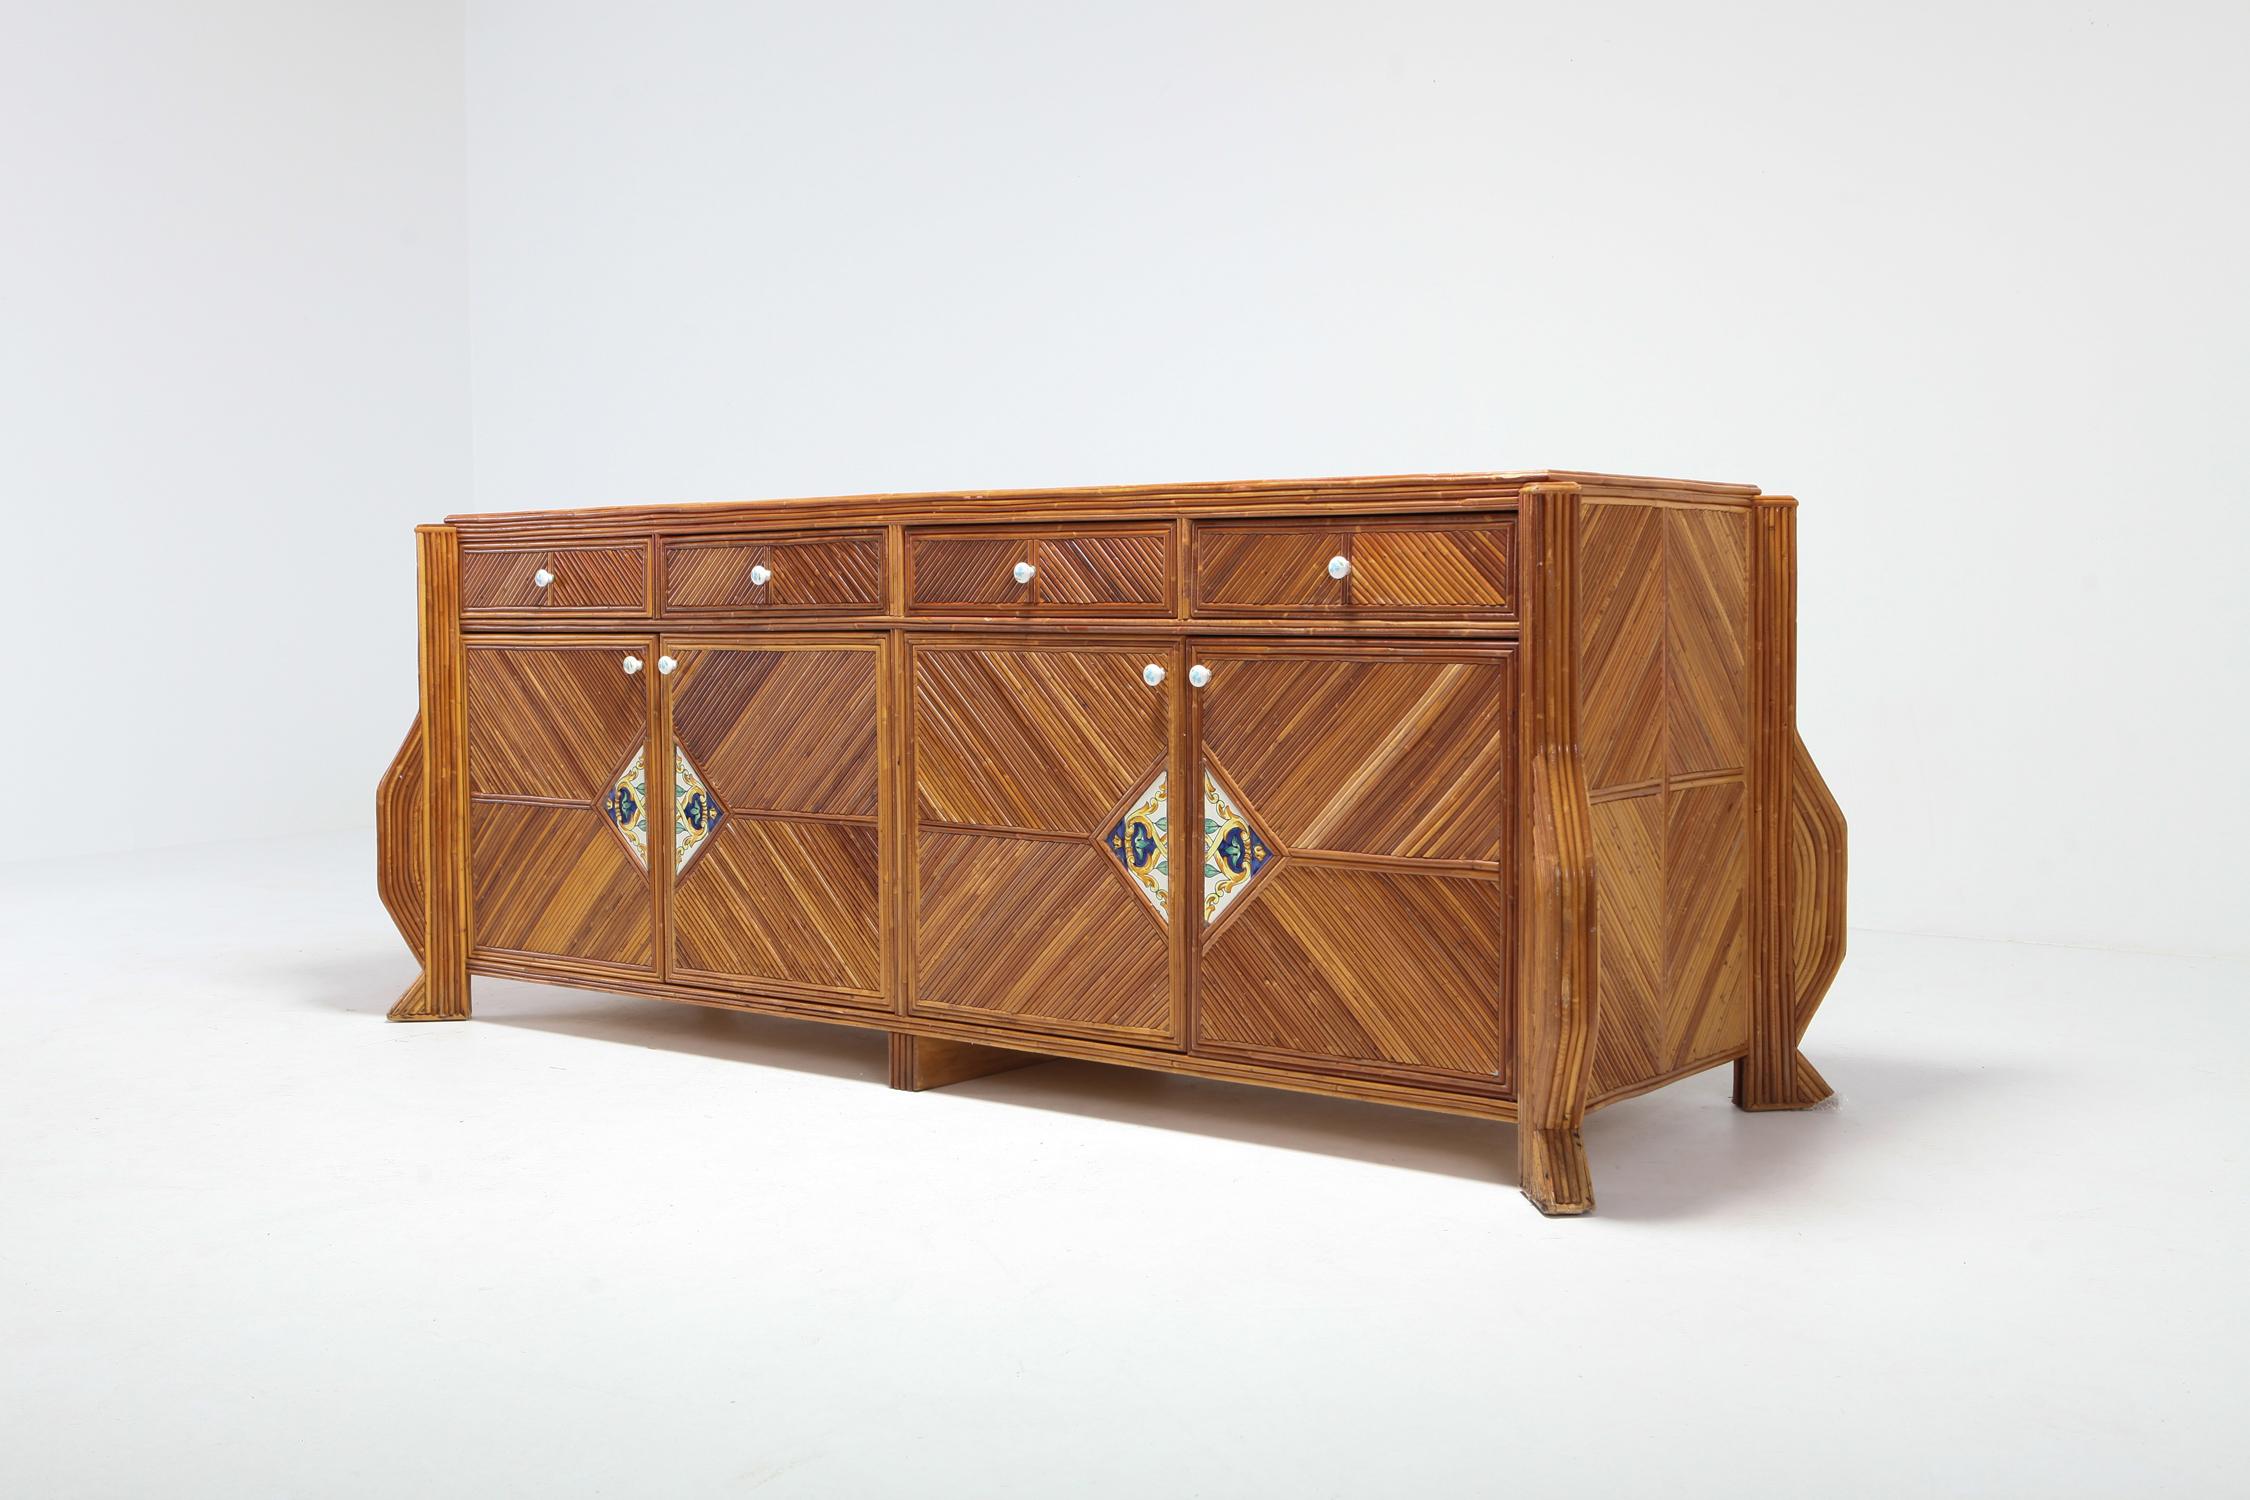 European Bamboo and Rattan Double Face Credenza by Vivai del Sud